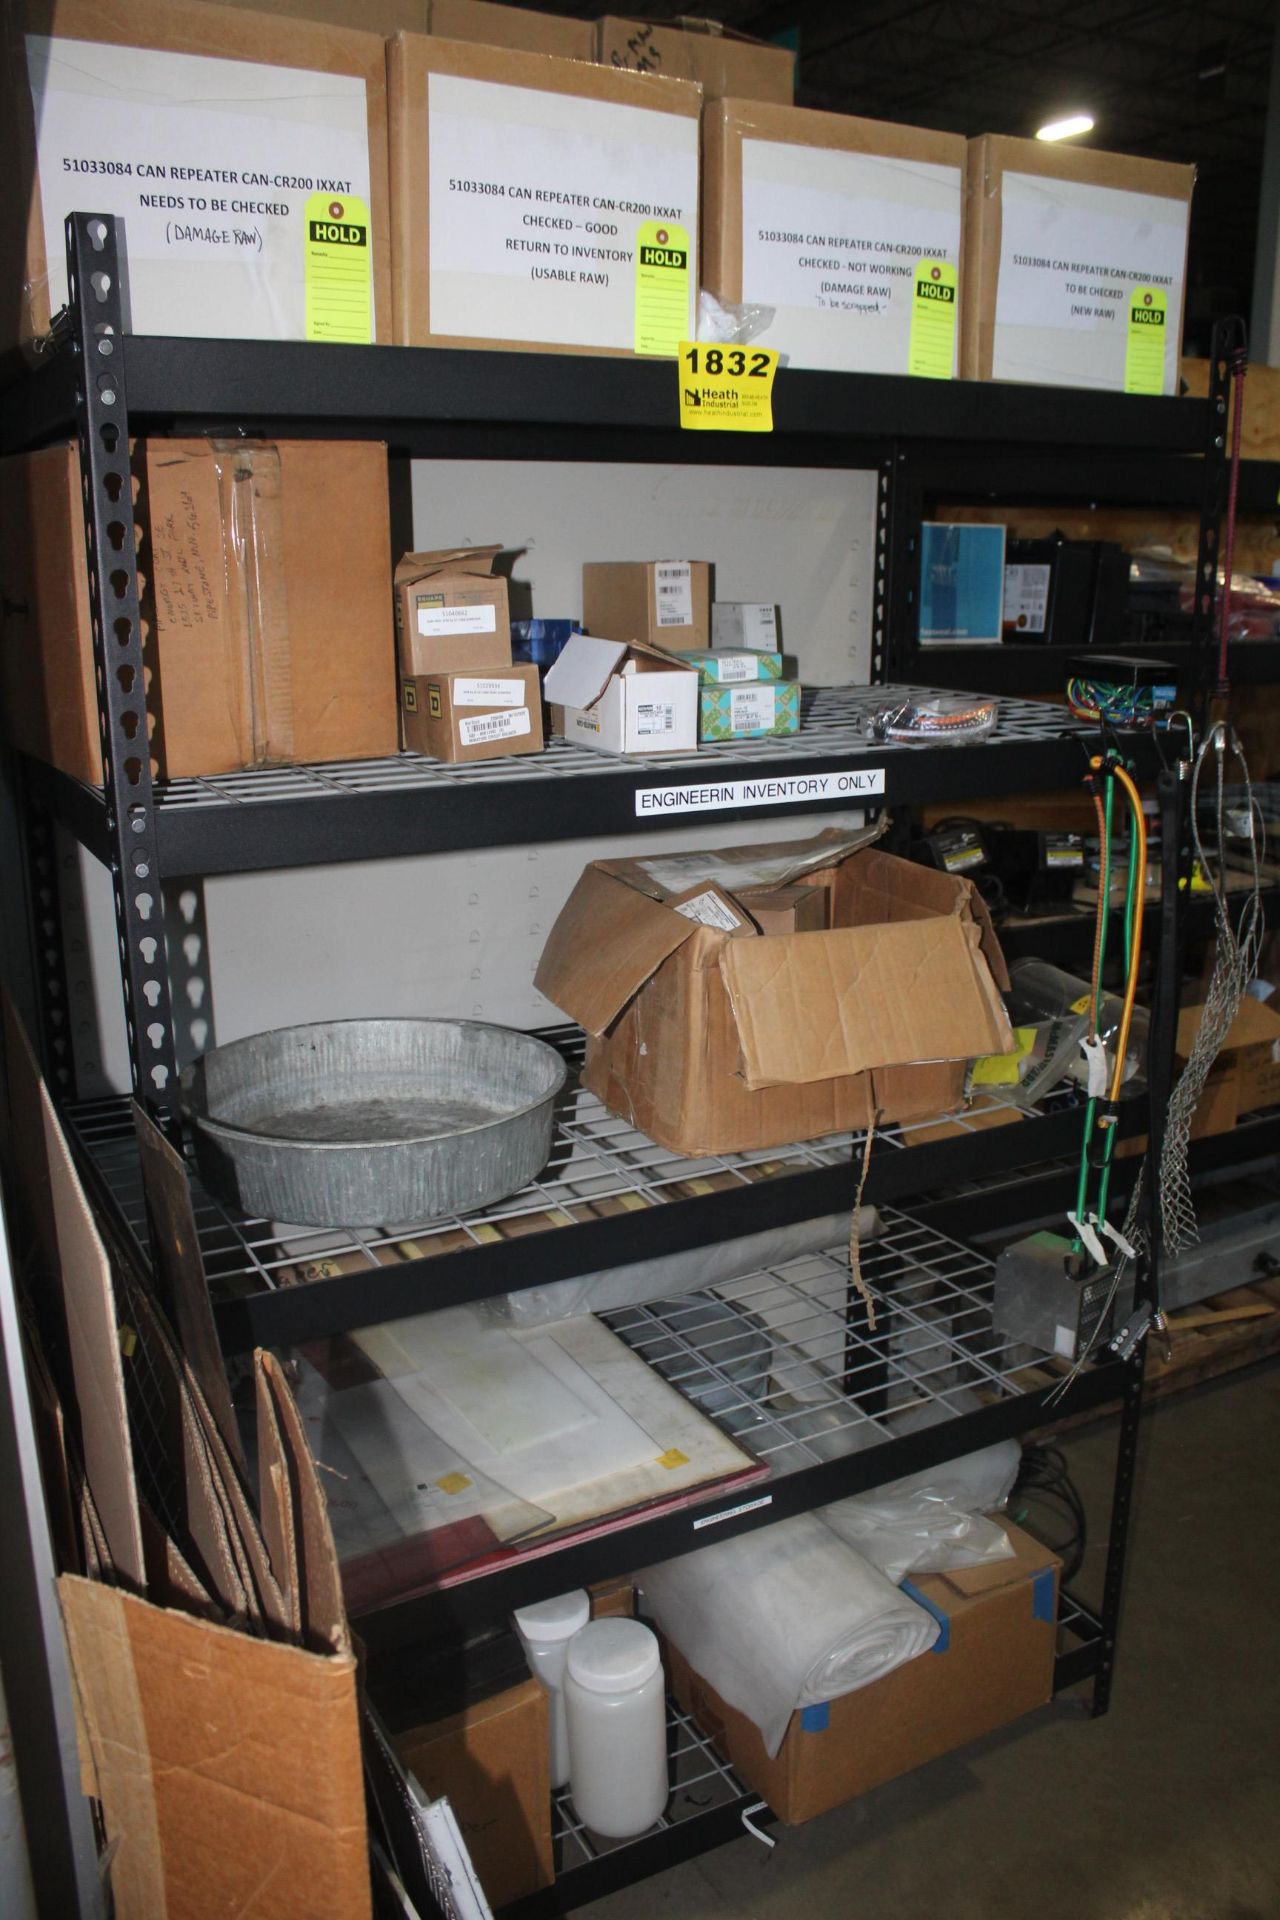 ADJUSTABLE STEEL SHELVING UNIT 48" X 24" X 72" WITH CONTENTS